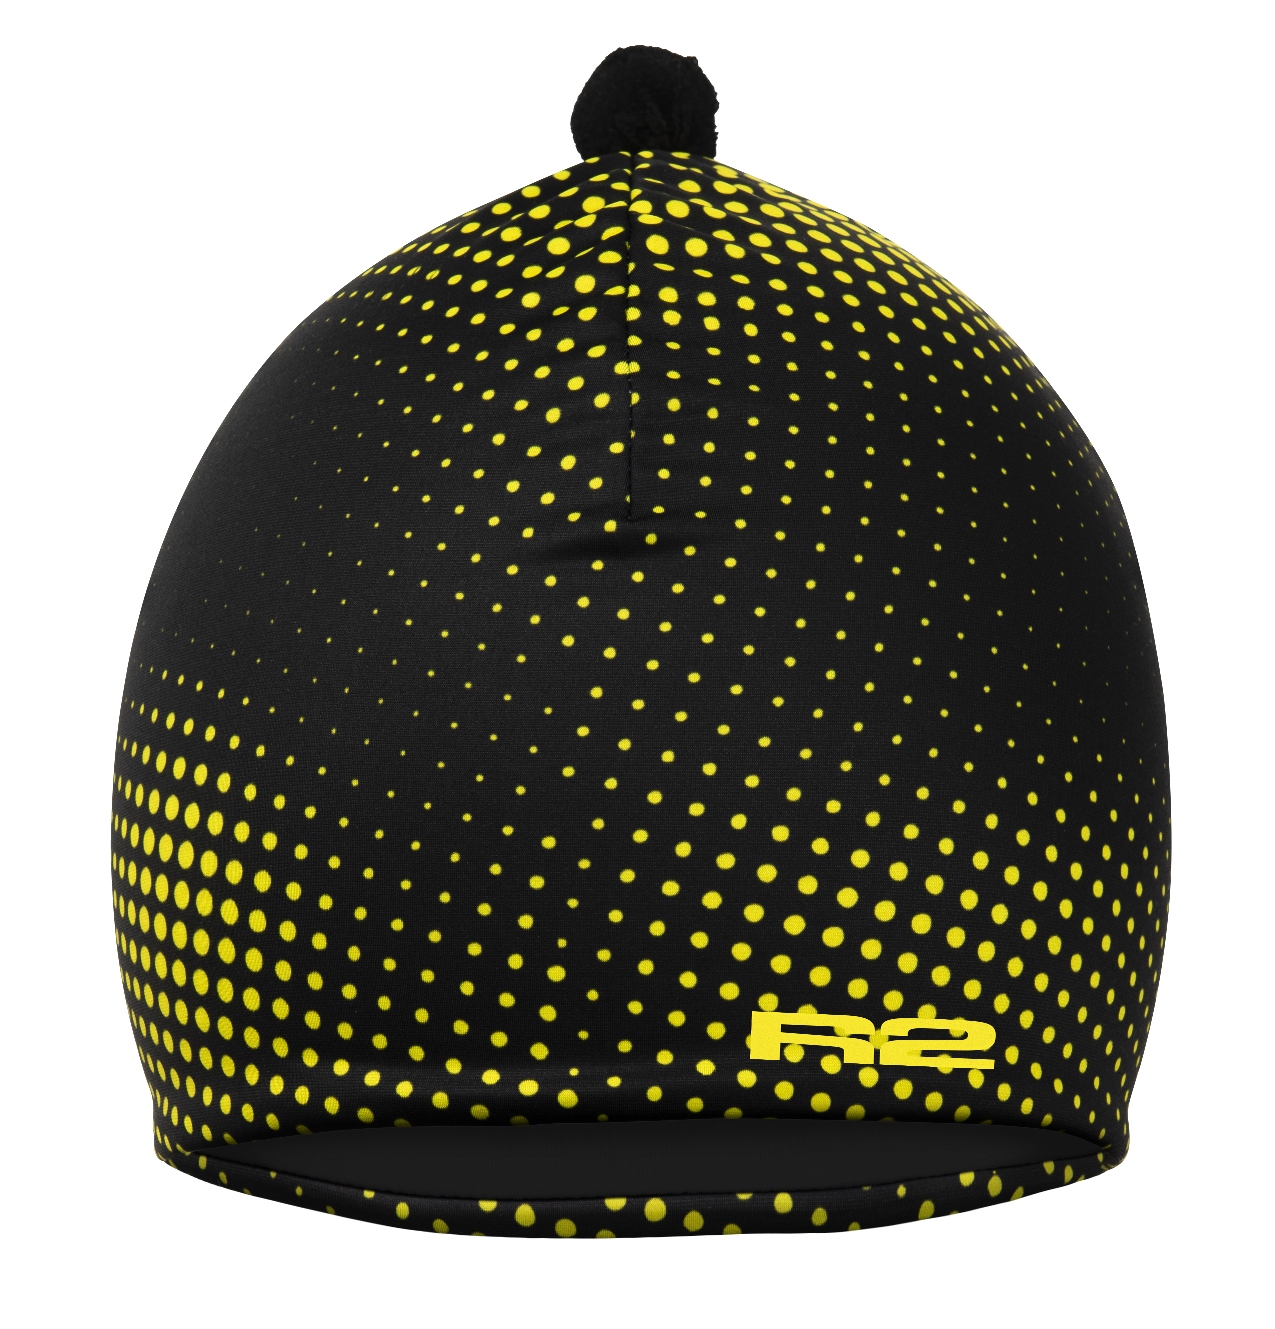 SPORTS FUNCTIONAL HAT R2 POINT  ATK11C L